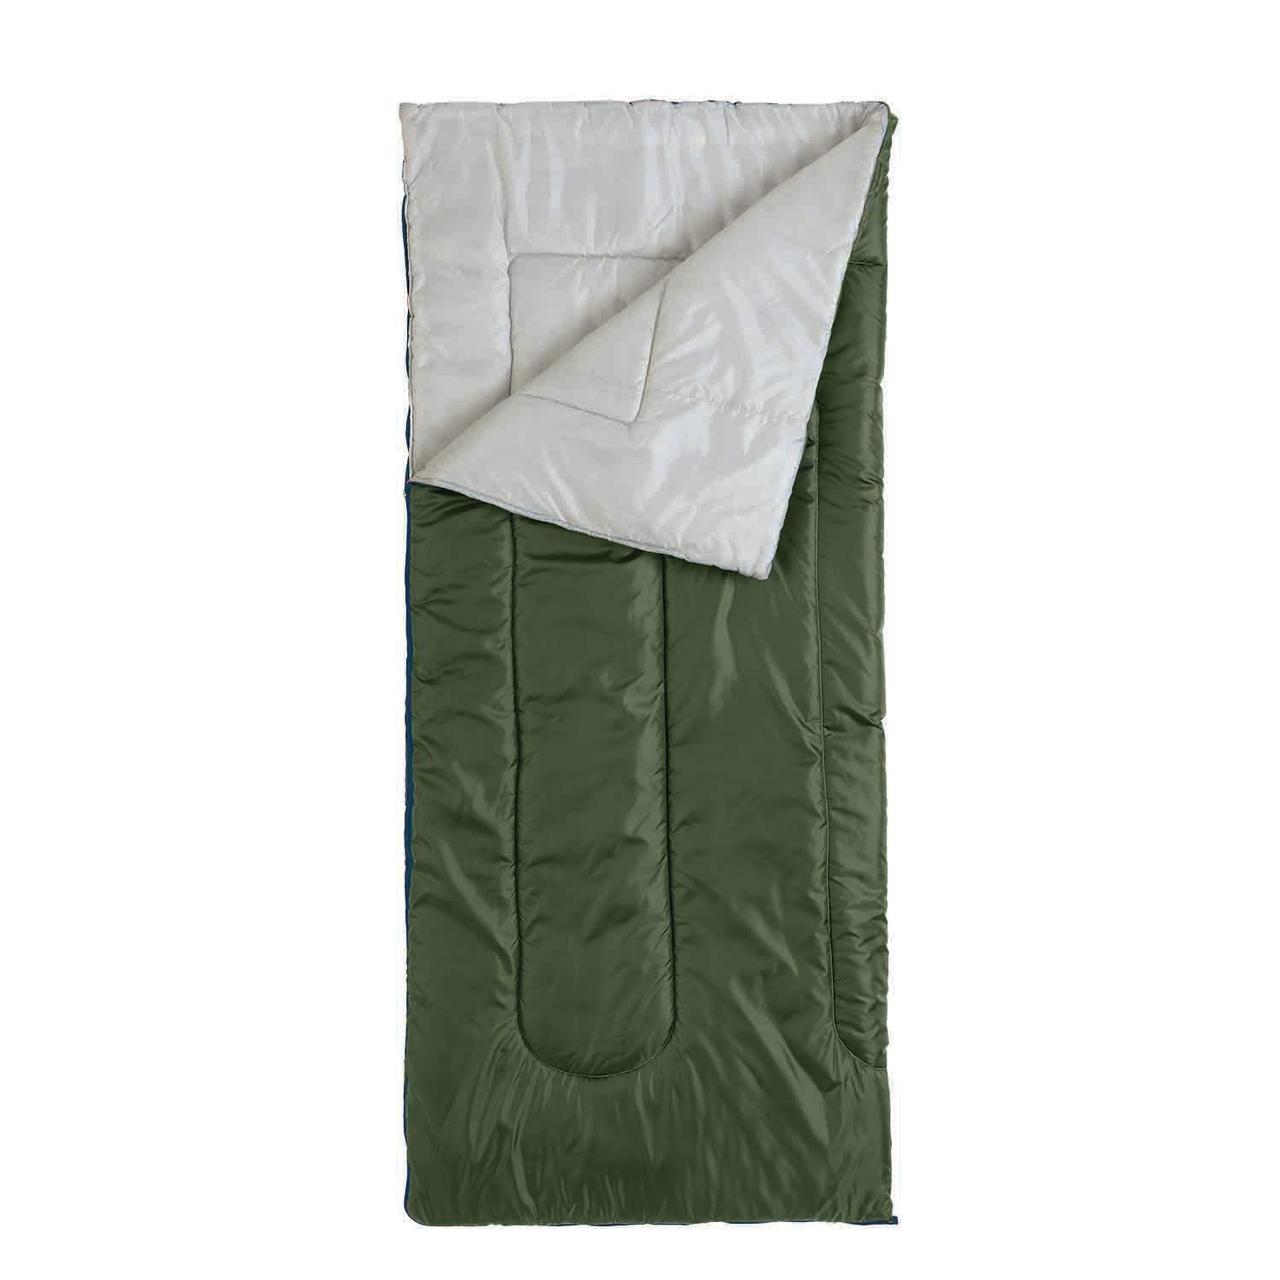 Ozark Trail 6-Piece Camping Combo -Green (Includes tent, chairs, sleeping bags, and table) - image 3 of 8